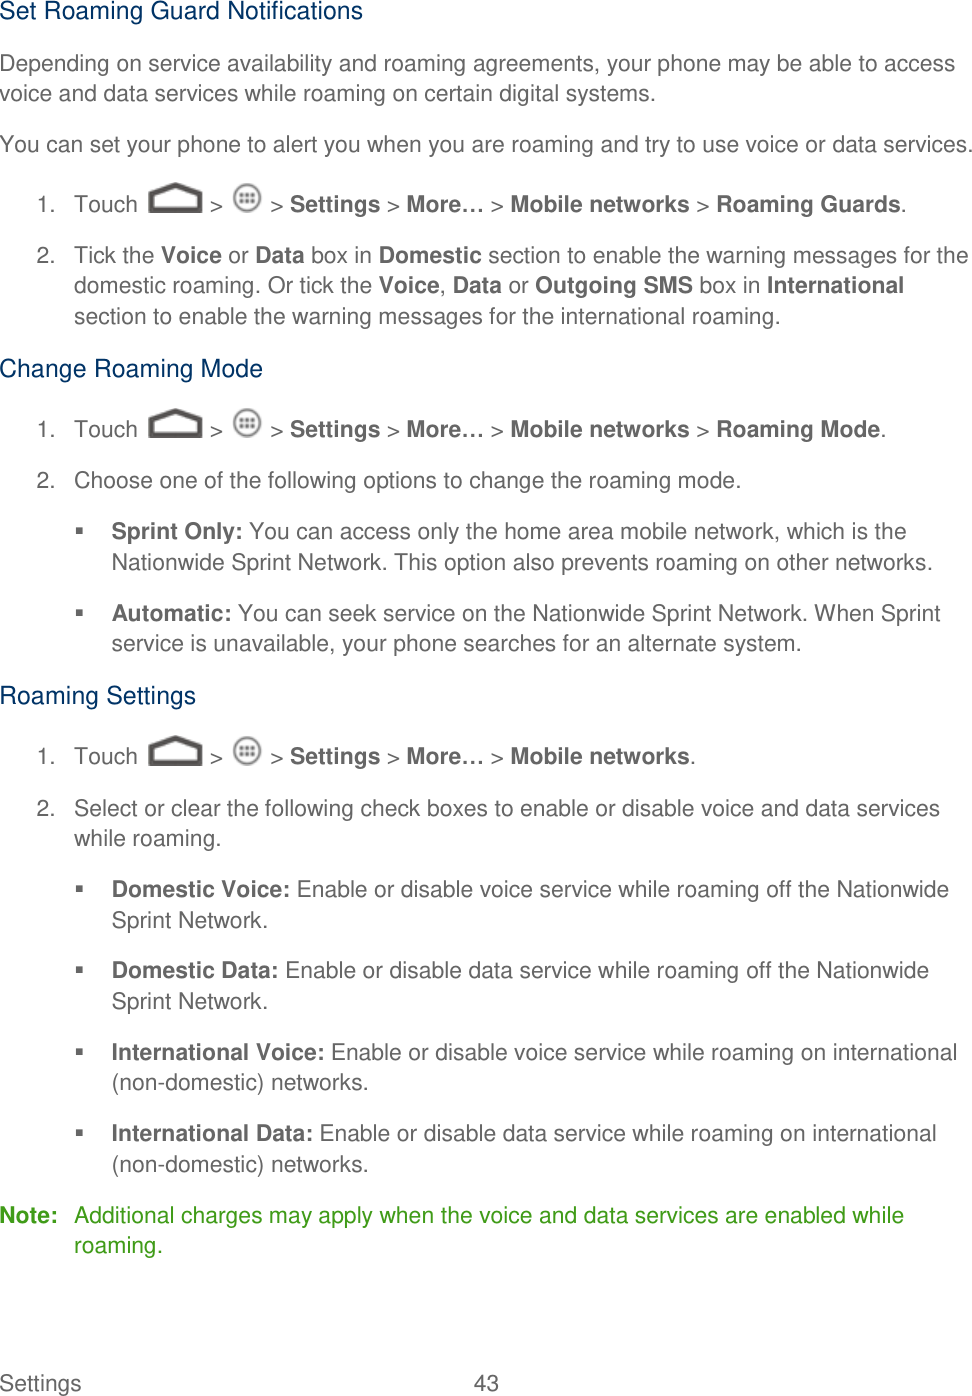 Settings    43 Set Roaming Guard Notifications Depending on service availability and roaming agreements, your phone may be able to access voice and data services while roaming on certain digital systems. You can set your phone to alert you when you are roaming and try to use voice or data services. 1.  Touch   &gt;   &gt; Settings &gt; More… &gt; Mobile networks &gt; Roaming Guards. 2.  Tick the Voice or Data box in Domestic section to enable the warning messages for the domestic roaming. Or tick the Voice, Data or Outgoing SMS box in International section to enable the warning messages for the international roaming. Change Roaming Mode 1.  Touch   &gt;   &gt; Settings &gt; More… &gt; Mobile networks &gt; Roaming Mode. 2.  Choose one of the following options to change the roaming mode.  Sprint Only: You can access only the home area mobile network, which is the Nationwide Sprint Network. This option also prevents roaming on other networks.  Automatic: You can seek service on the Nationwide Sprint Network. When Sprint service is unavailable, your phone searches for an alternate system. Roaming Settings 1.  Touch   &gt;   &gt; Settings &gt; More… &gt; Mobile networks. 2.  Select or clear the following check boxes to enable or disable voice and data services while roaming.  Domestic Voice: Enable or disable voice service while roaming off the Nationwide Sprint Network.  Domestic Data: Enable or disable data service while roaming off the Nationwide Sprint Network.  International Voice: Enable or disable voice service while roaming on international (non-domestic) networks.  International Data: Enable or disable data service while roaming on international (non-domestic) networks. Note:  Additional charges may apply when the voice and data services are enabled while roaming. 